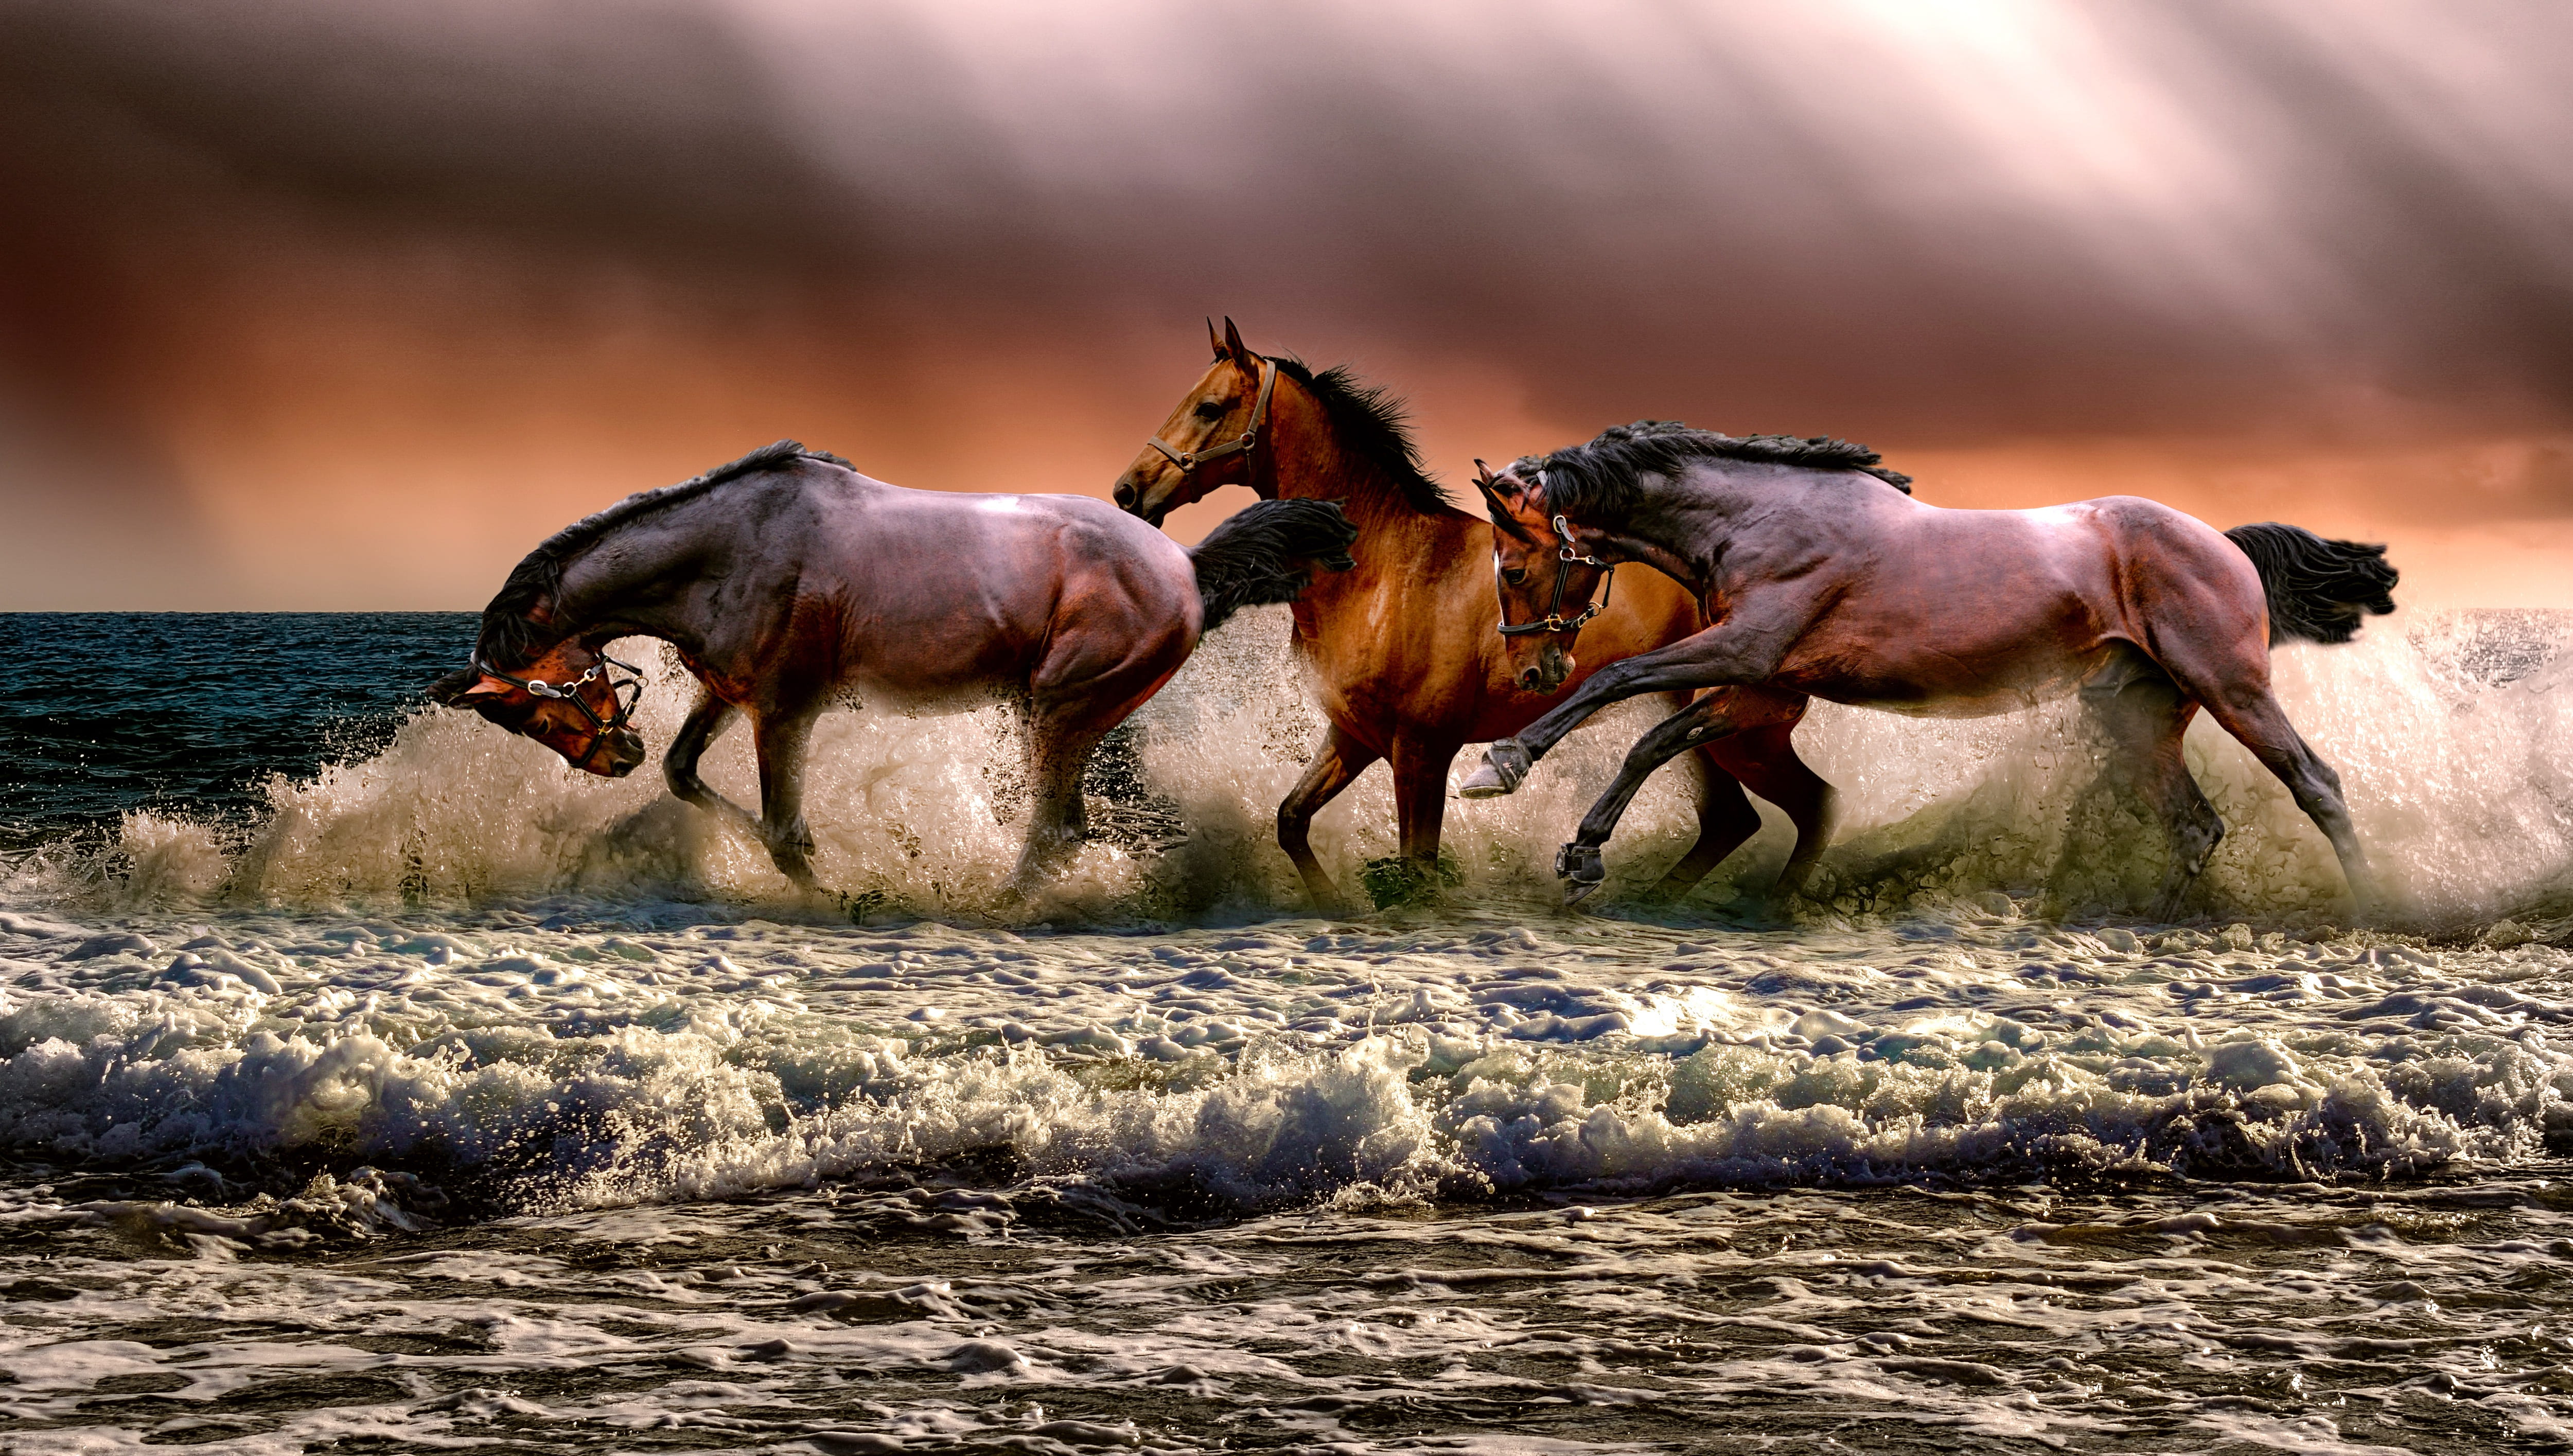 Three galloping horses on body of water HD Wallpapers | HD Wallpapers